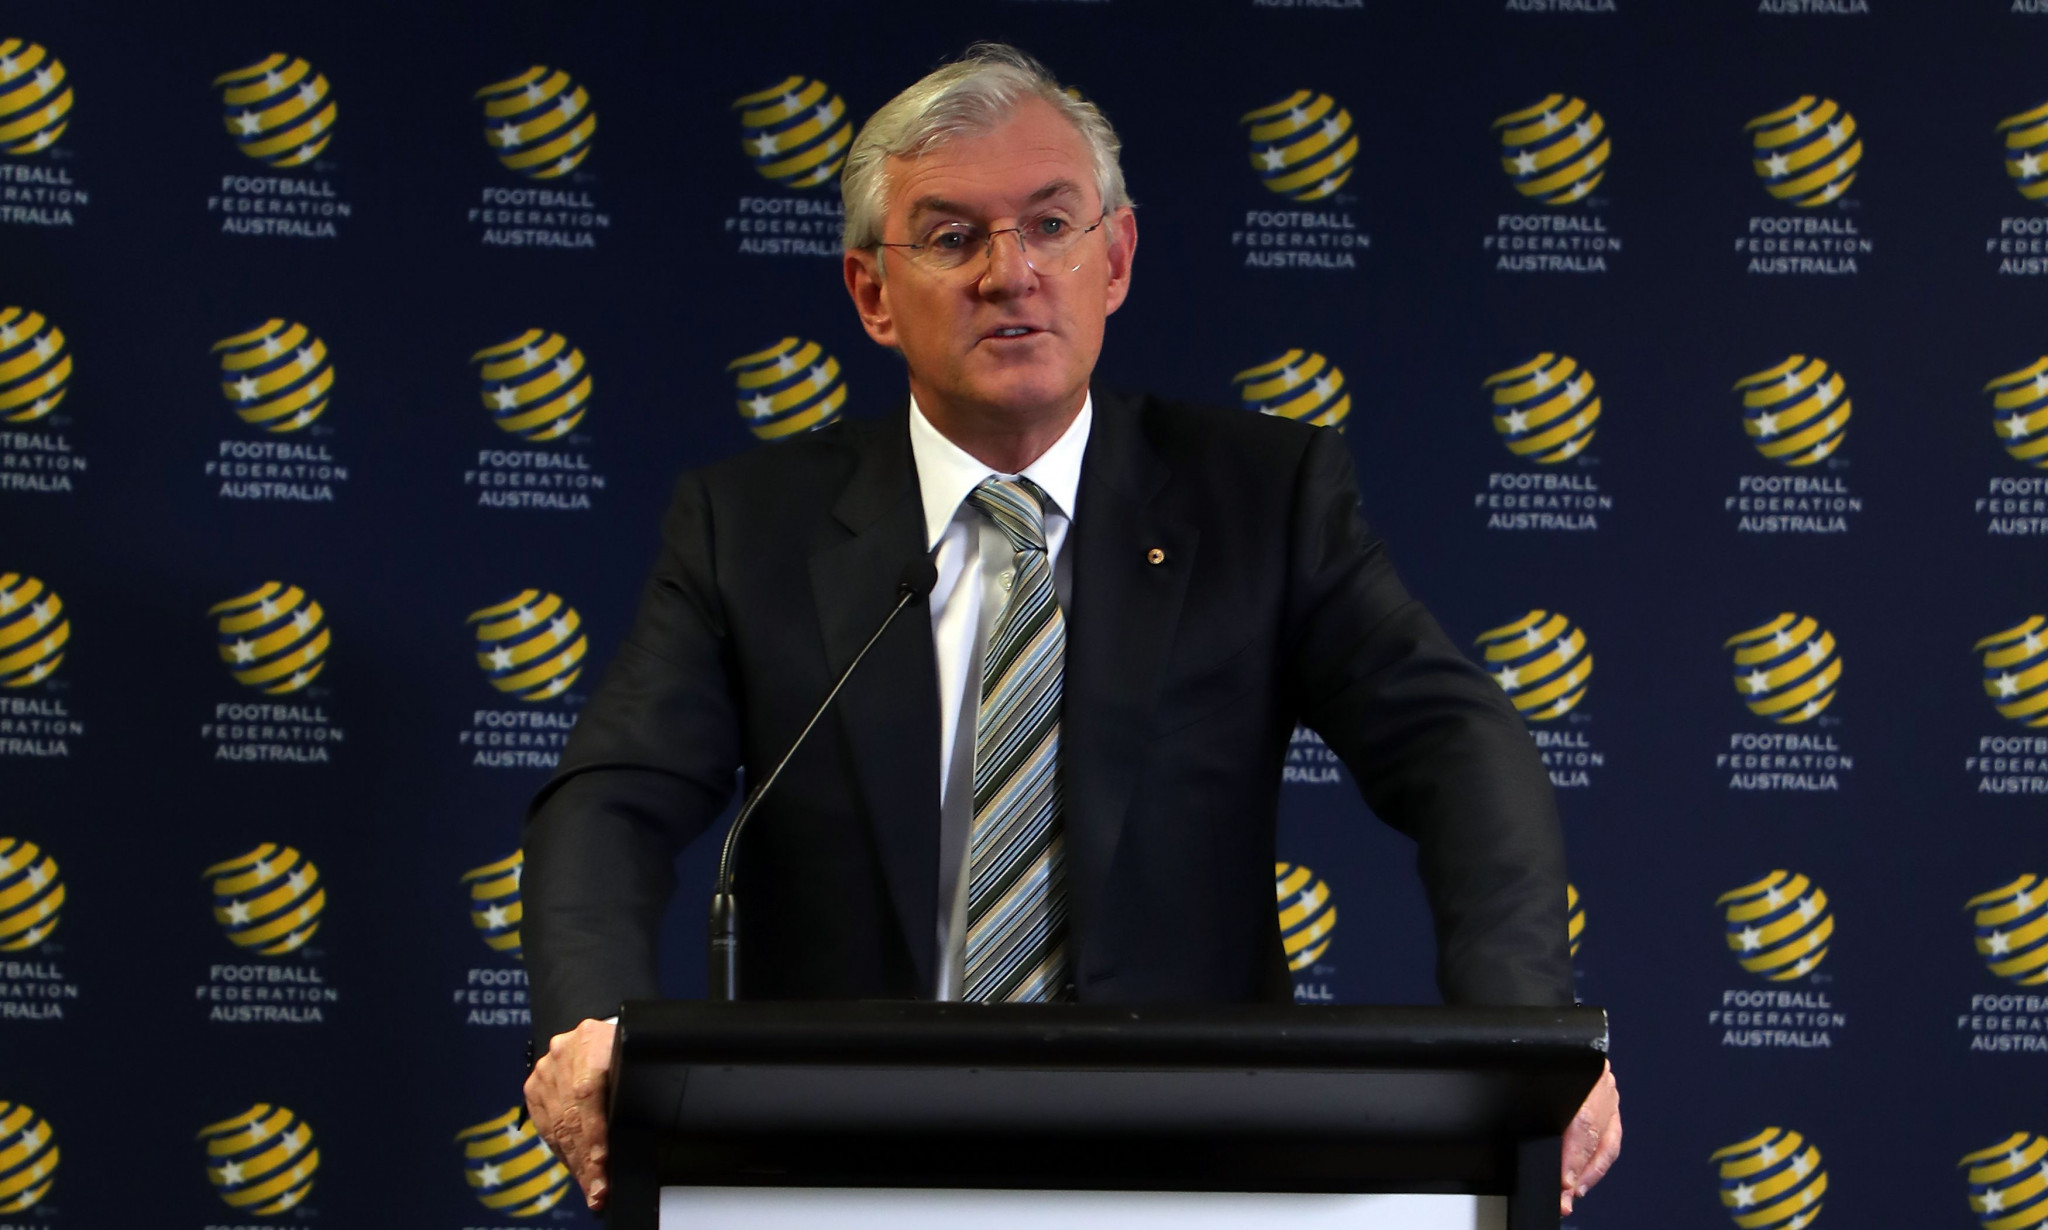 FFA chairman Steven Lowy confirmed last month he would not seek re-election amid the governance row ©Getty Images